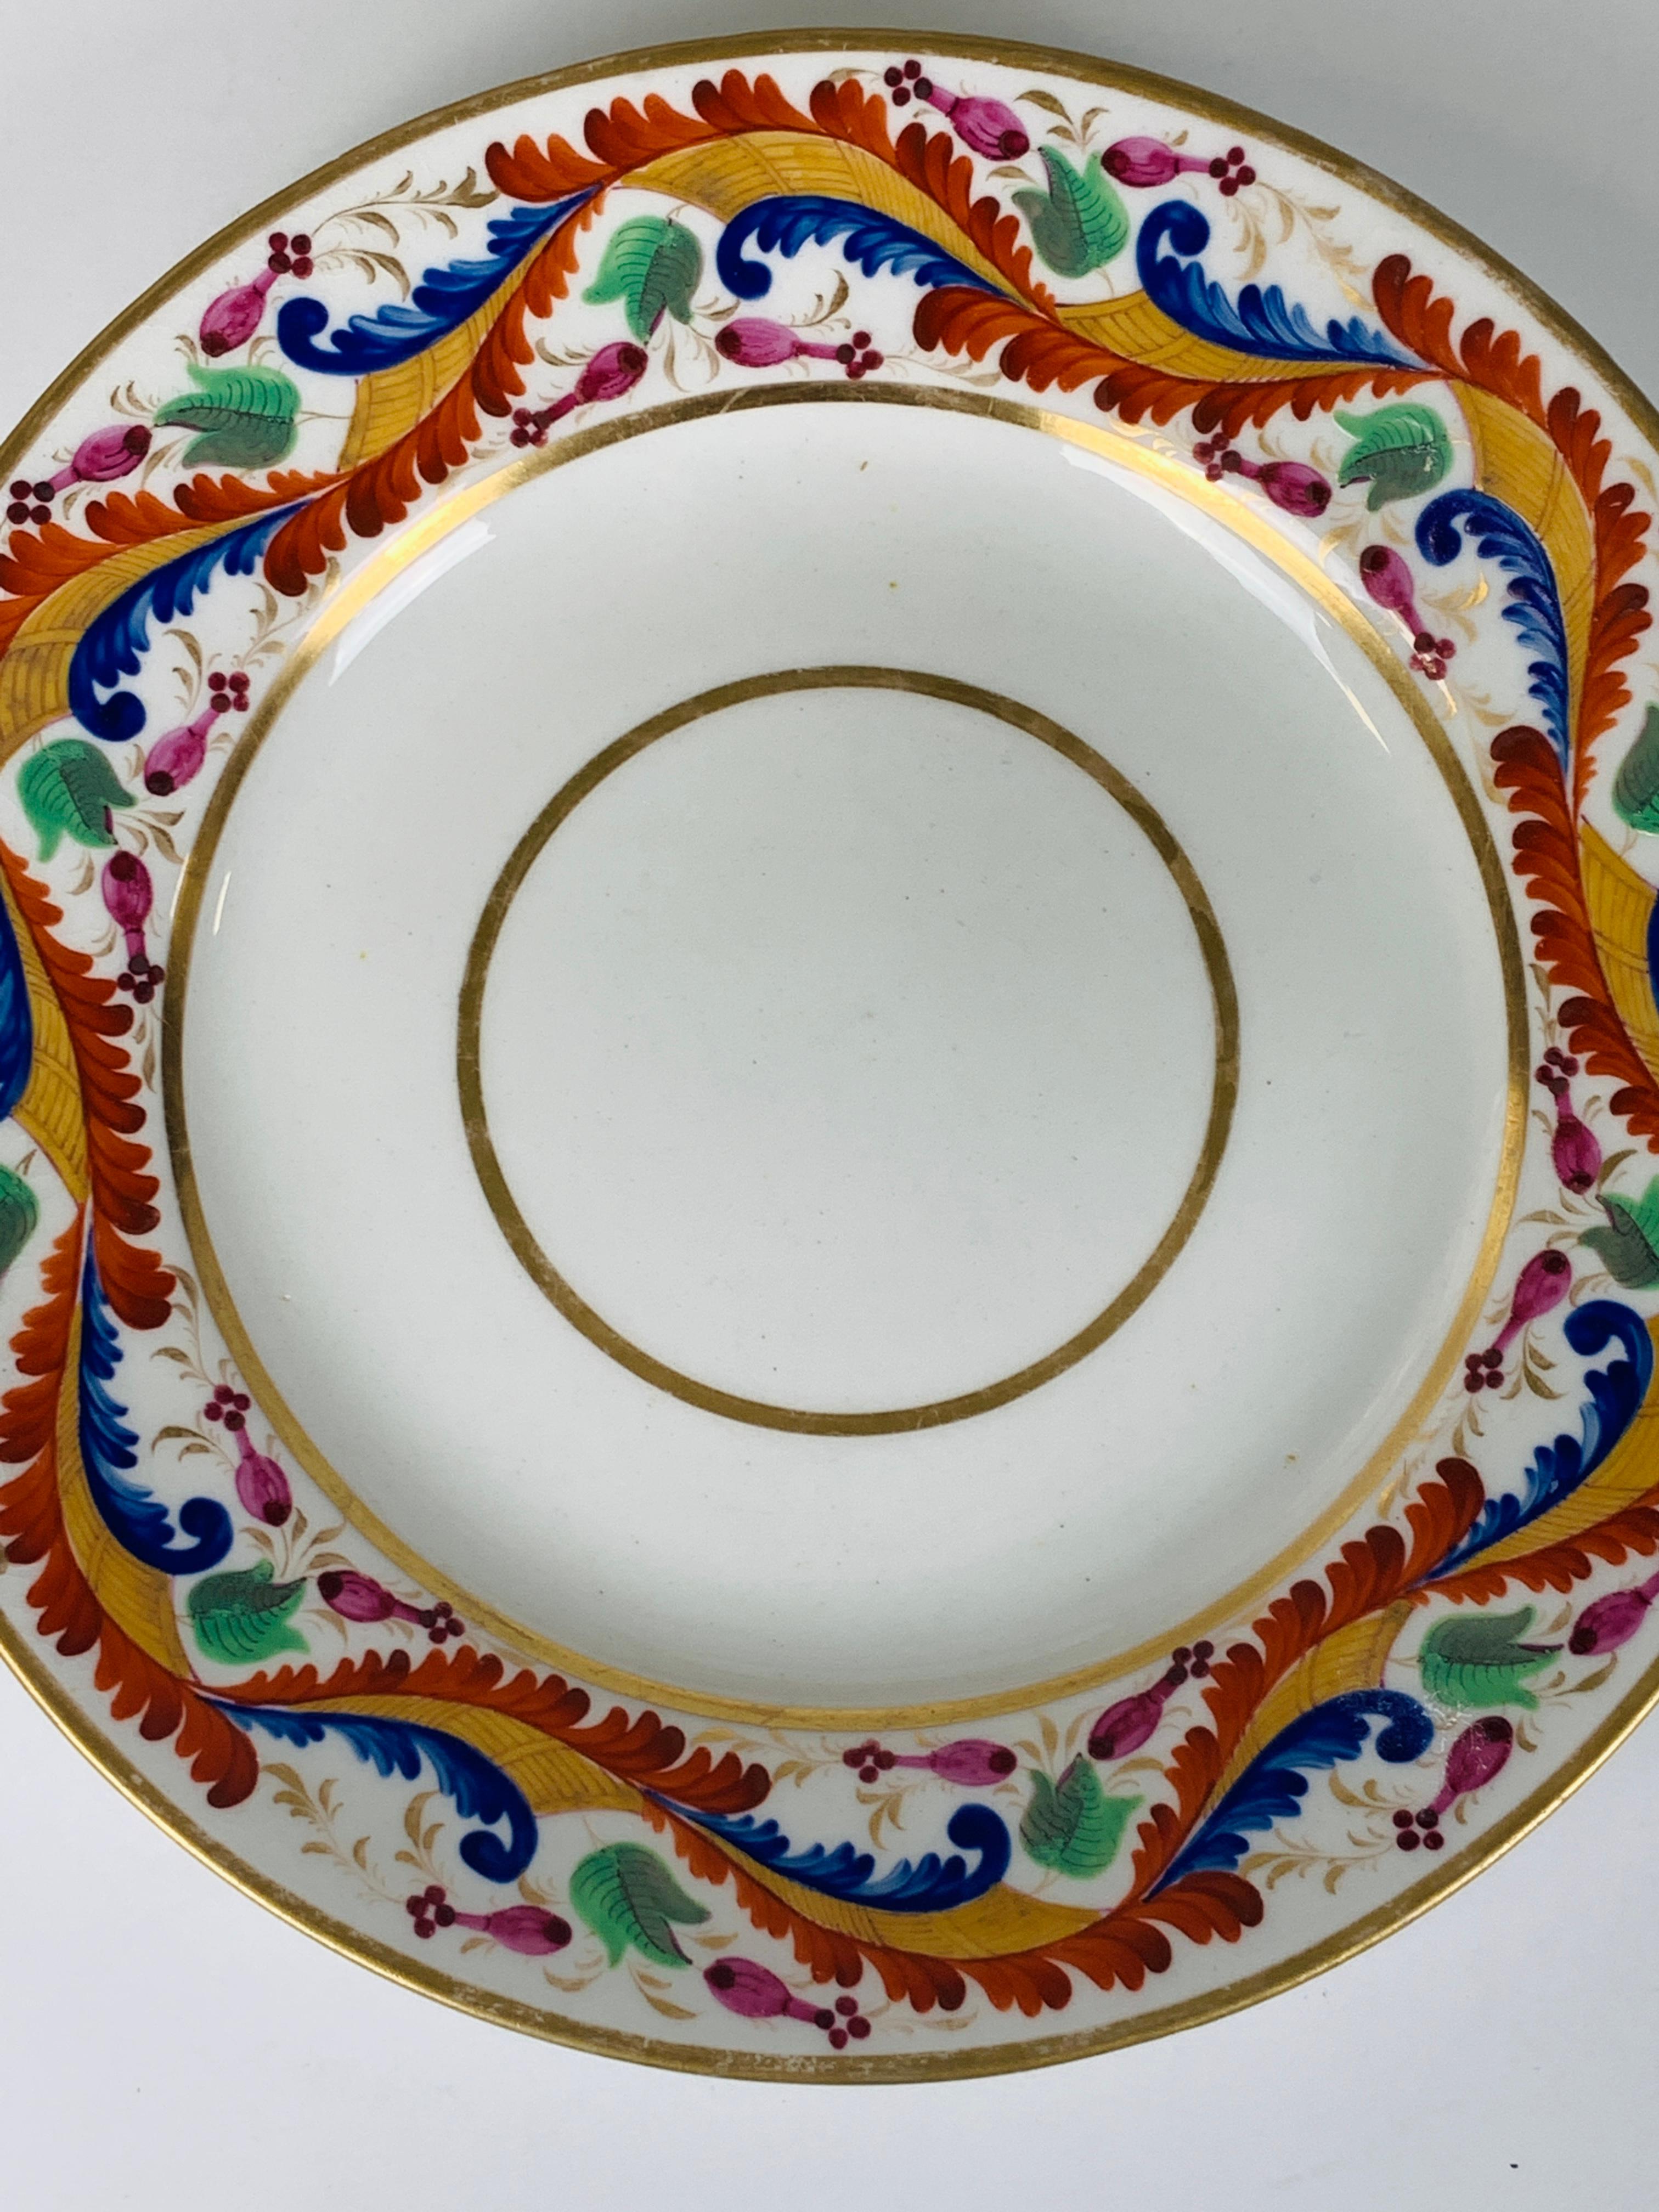 Porcelain Set of Five Derby Dishes Hand-Painted in England, circa 1810